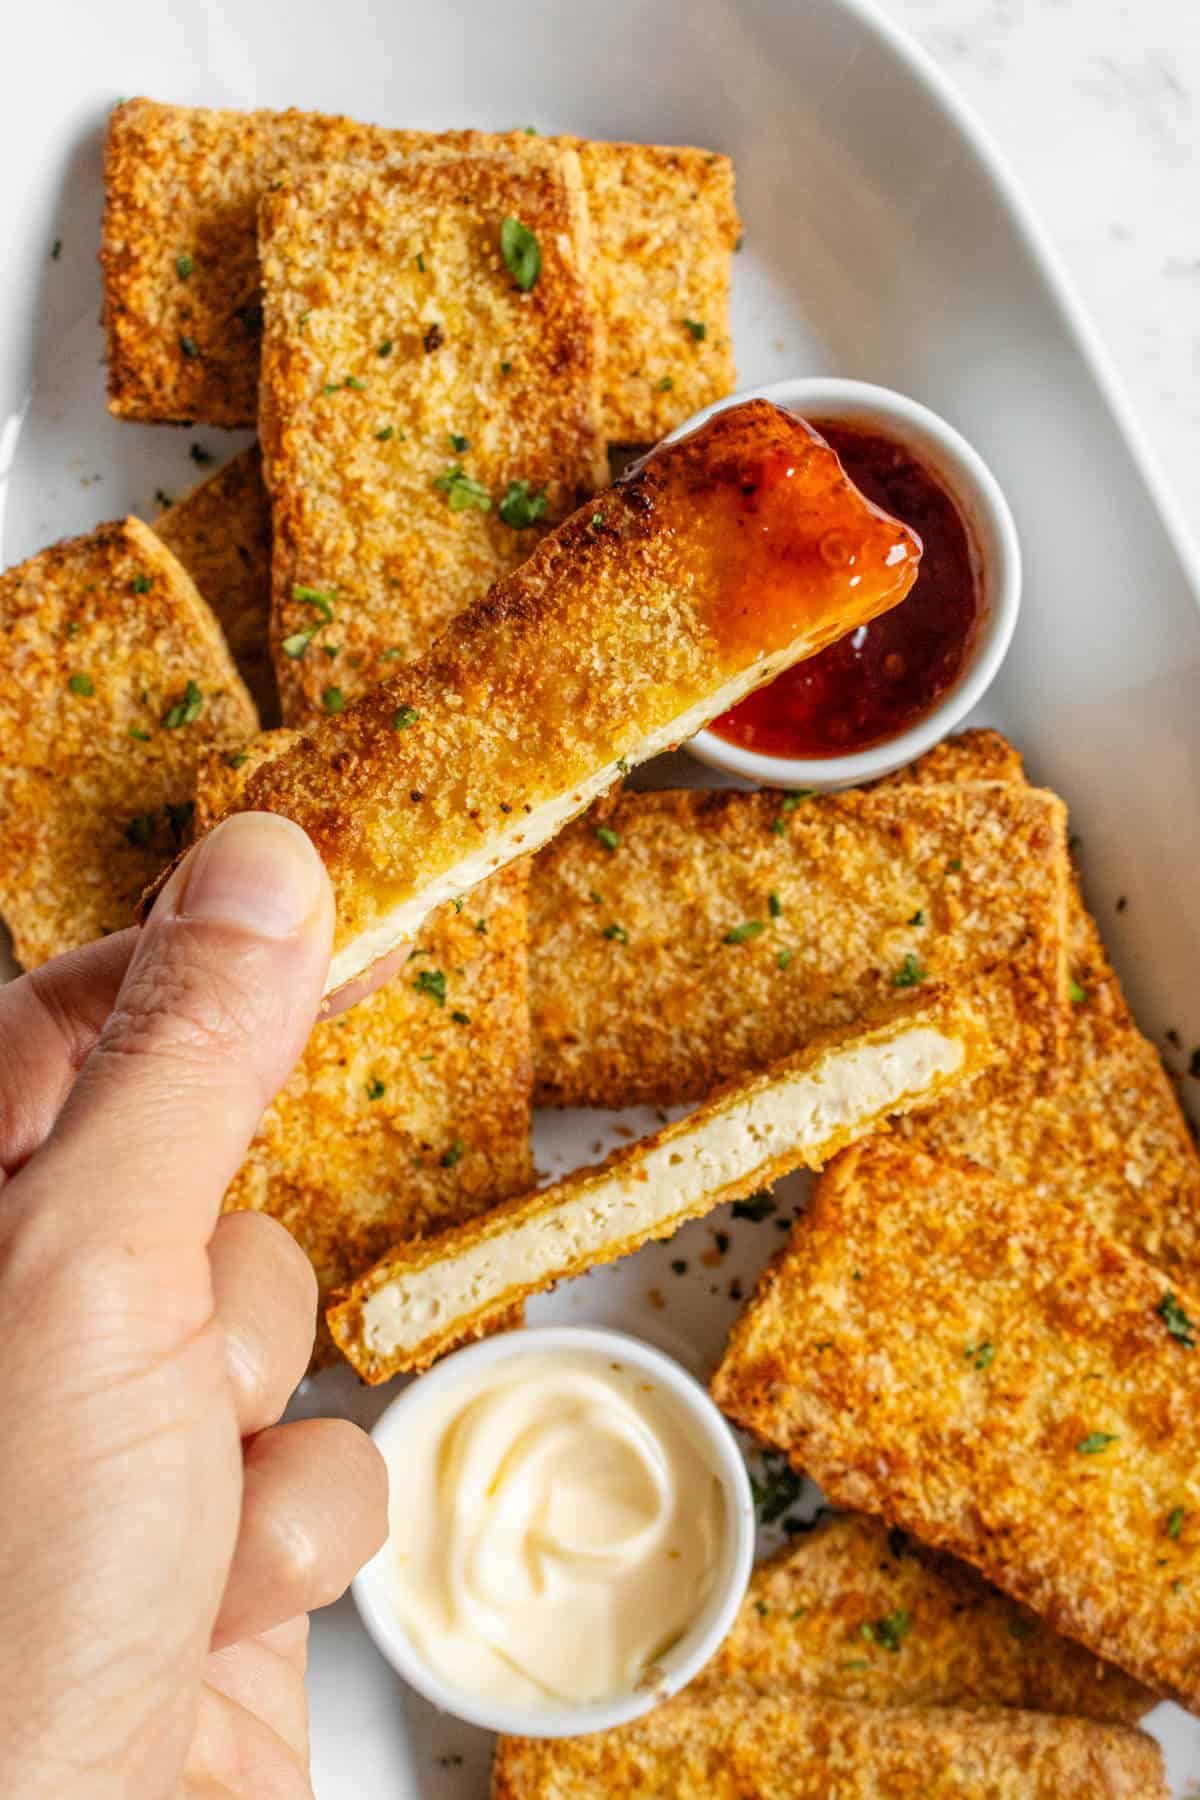 Piece of breaded tofu being dipped in sweet chilli sauce